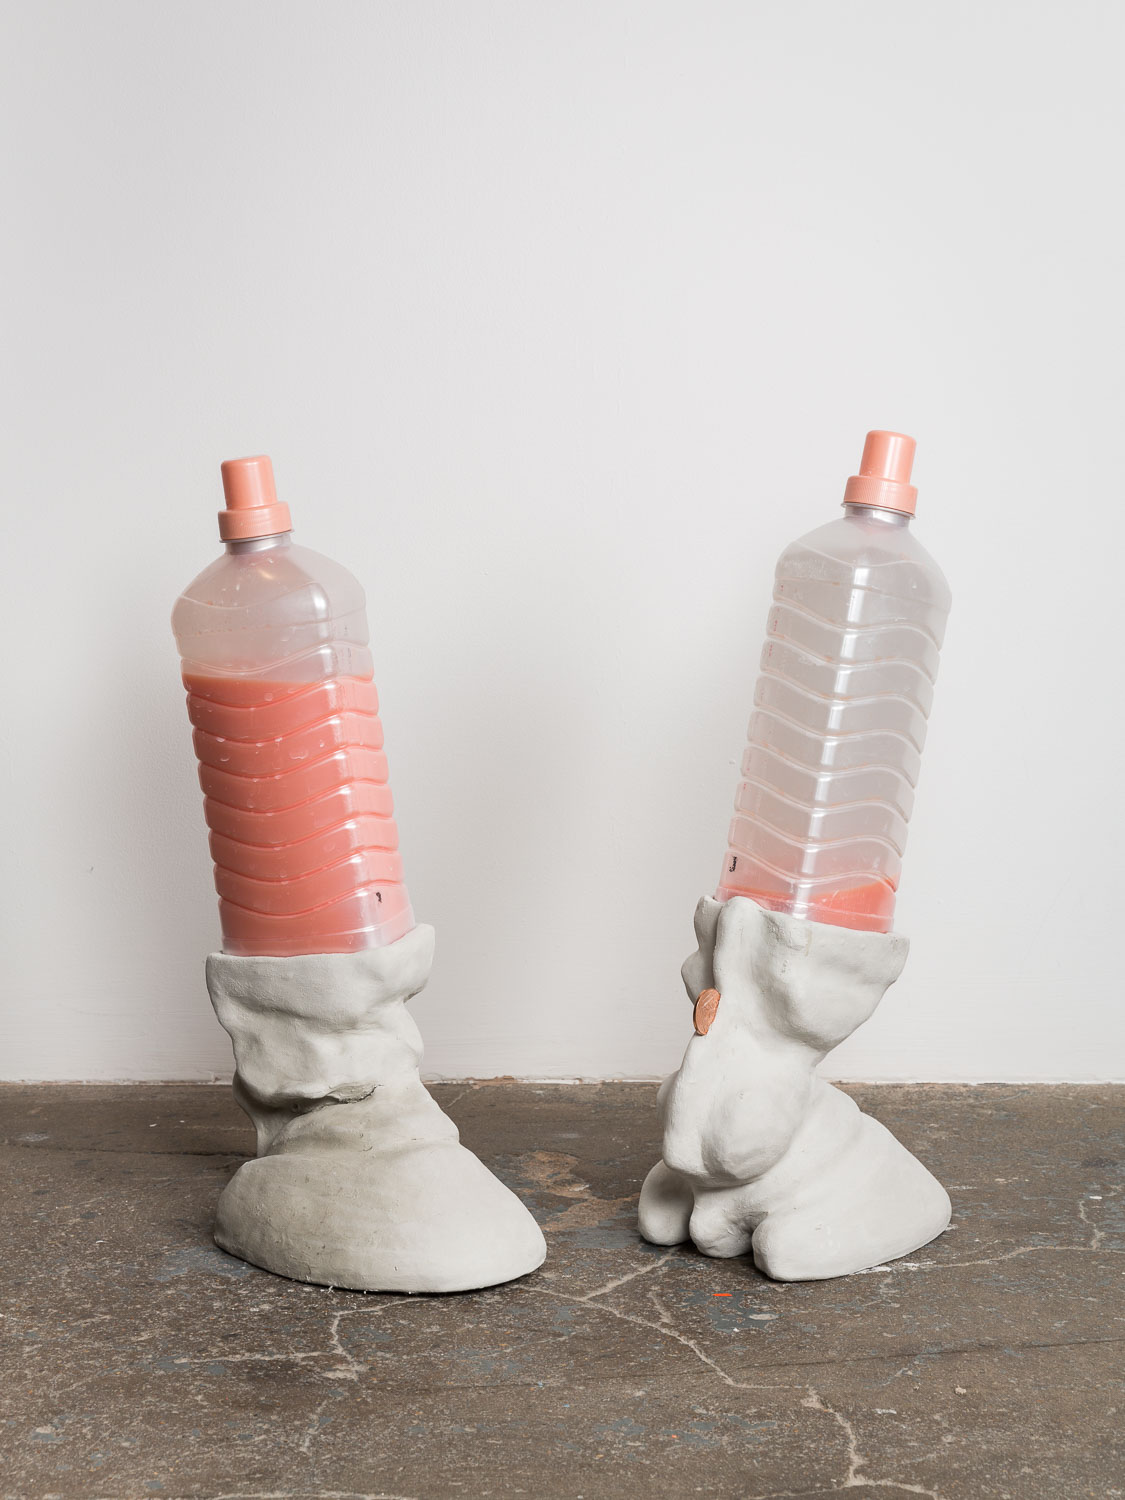 Lena Henke, Laundry Day, 2015, clay, bottle, detergent, coin, 2 parts each: 47 x 23 x 9 cm, 18 1/2 x 9 1/8 x 3 1/2 ins. One step away from further Hell
, Lena Henke and Marie Karlberg